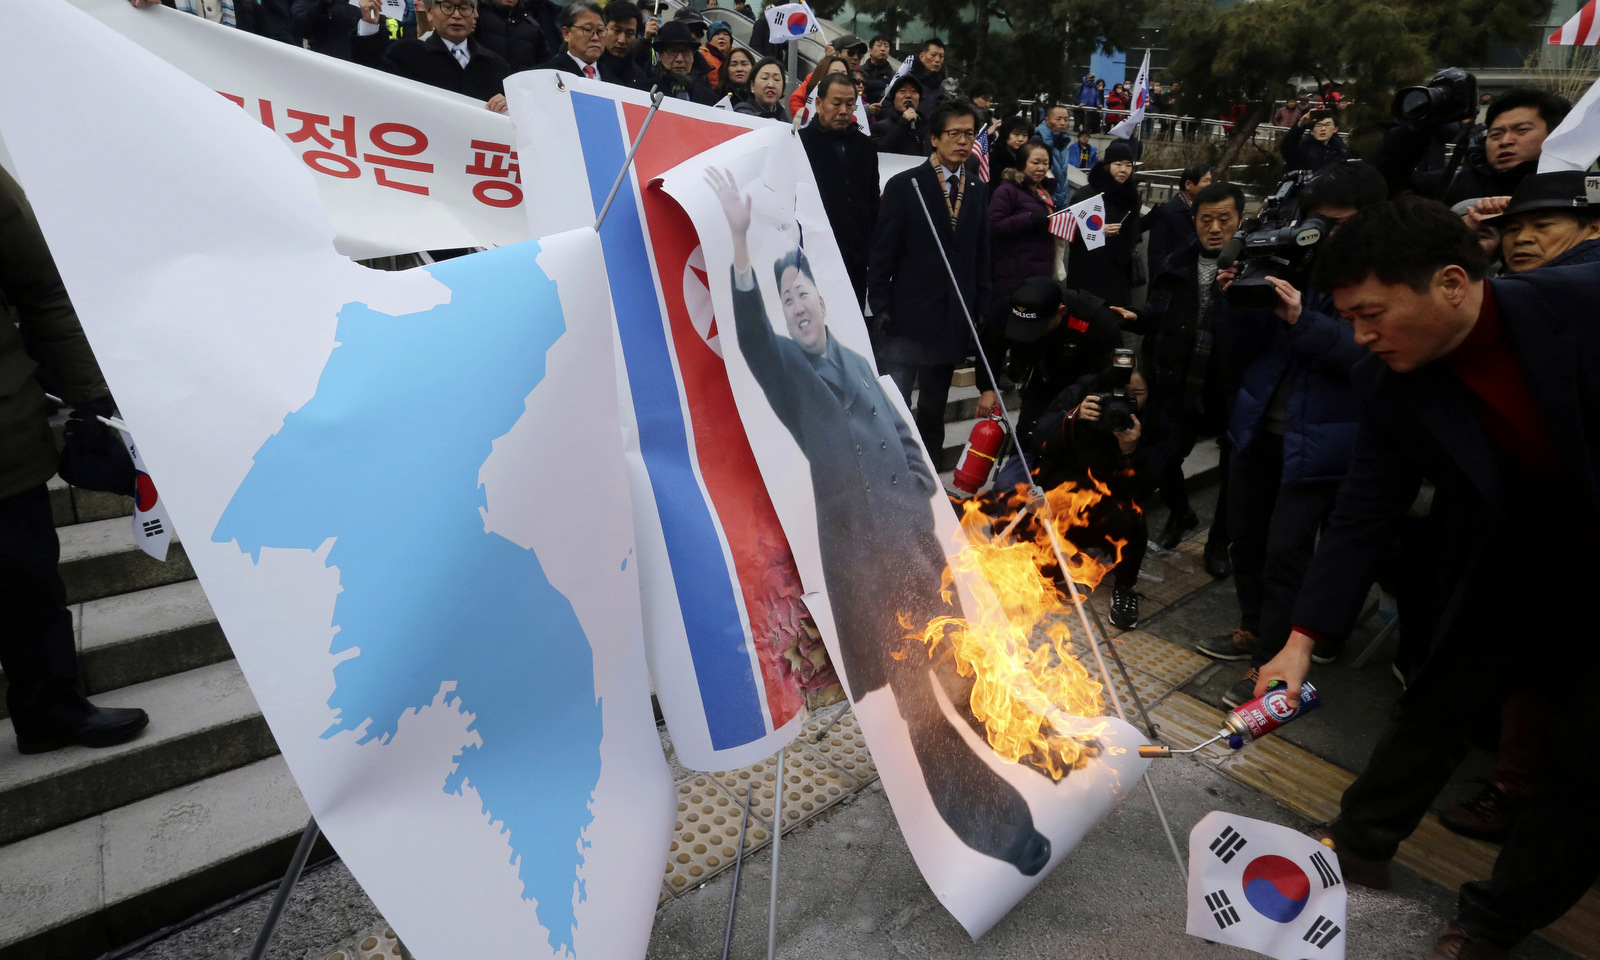 South Korean protesters burn a portrait of North Korean leader Kim Jong-un during a rally against a visit of North Korean Hyon Song Wol, head of North Korea's art troupe in Seoul, South Korea, Jan. 22, 2018. The protesters later burned Kim's photo, a North Korean flag and a Korean unification flag. (AP/Ahn Young-joon)